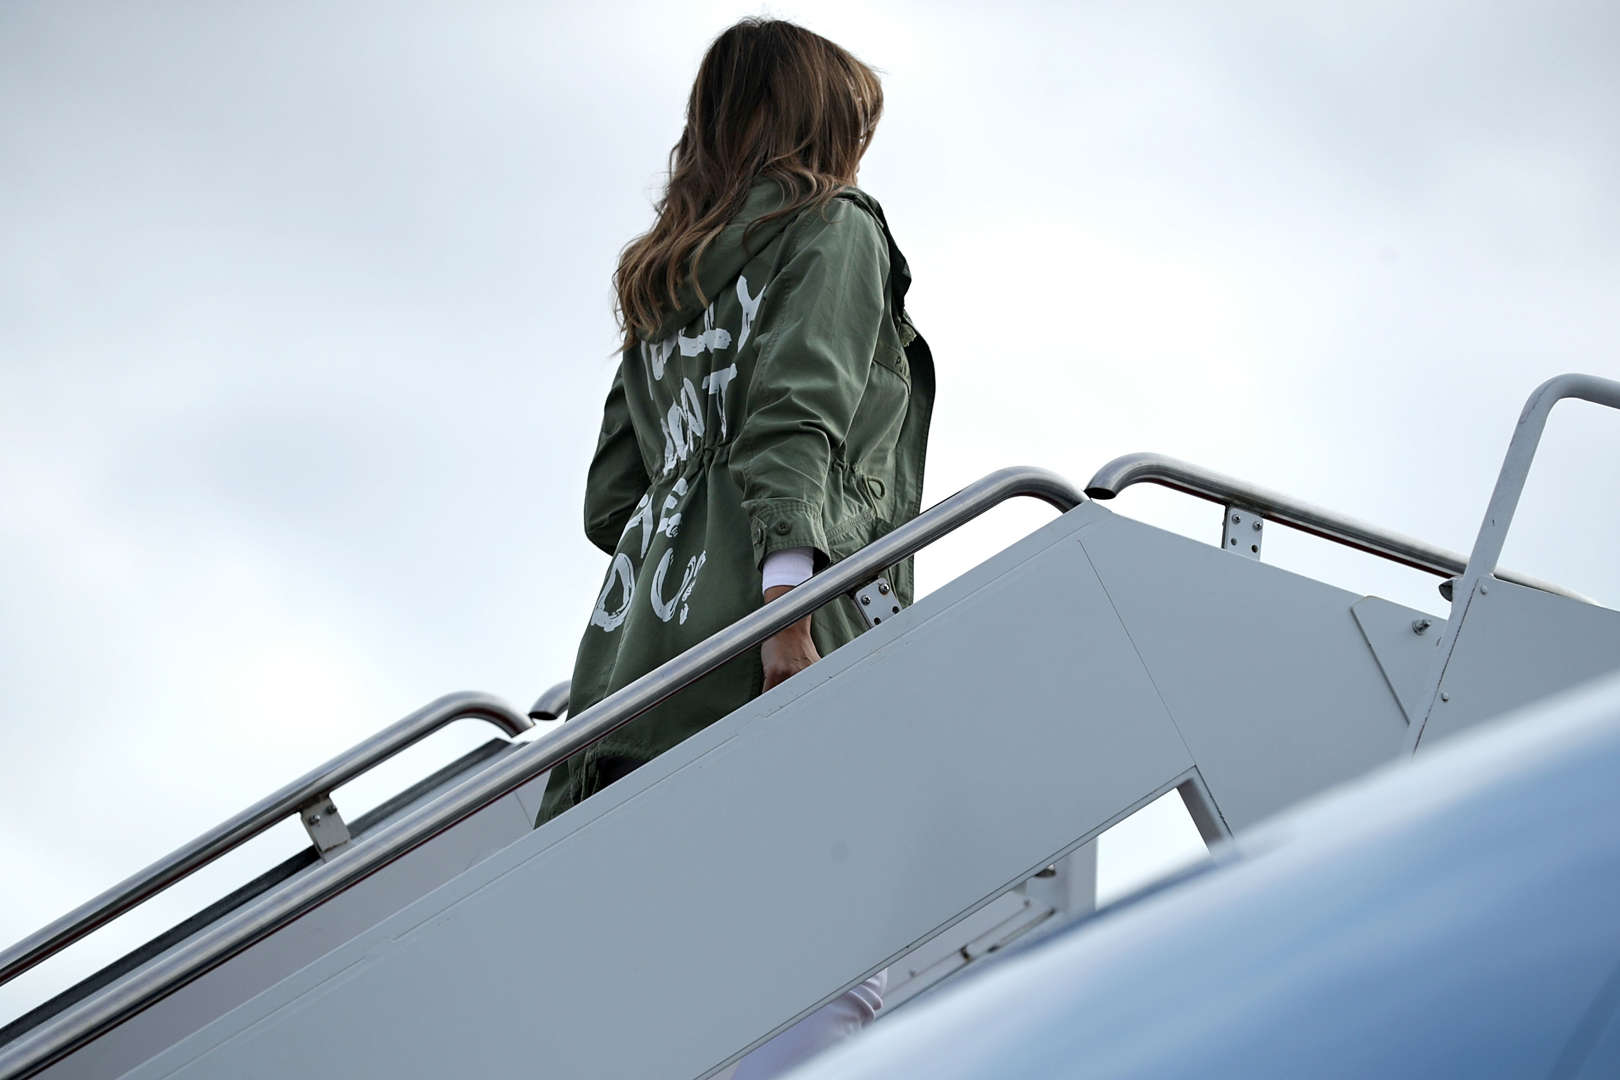 JOINT BASE ANDREWS - JUNE 21:  U.S. first lady Melania Trump boards an Air Force plane before traveling to Texas to visit facilities that house and care for children taken from their parents at the U.S.-Mexico border June 21, 2018 at Joint Base Andrews, Maryland. The first lady is traveling to Texas to see first hand the condition and treatment that children taken from their families at the border were receiving from the federal government. Following public outcry and criticism from members of his own party, President Donald Trump signed an executive order Wednesday to stop the separation of migrant children from their families, a practice the administration employed to deter illegal immigration at the U.S.-Mexico border.  (Photo by Chip Somodevilla/Getty Images)